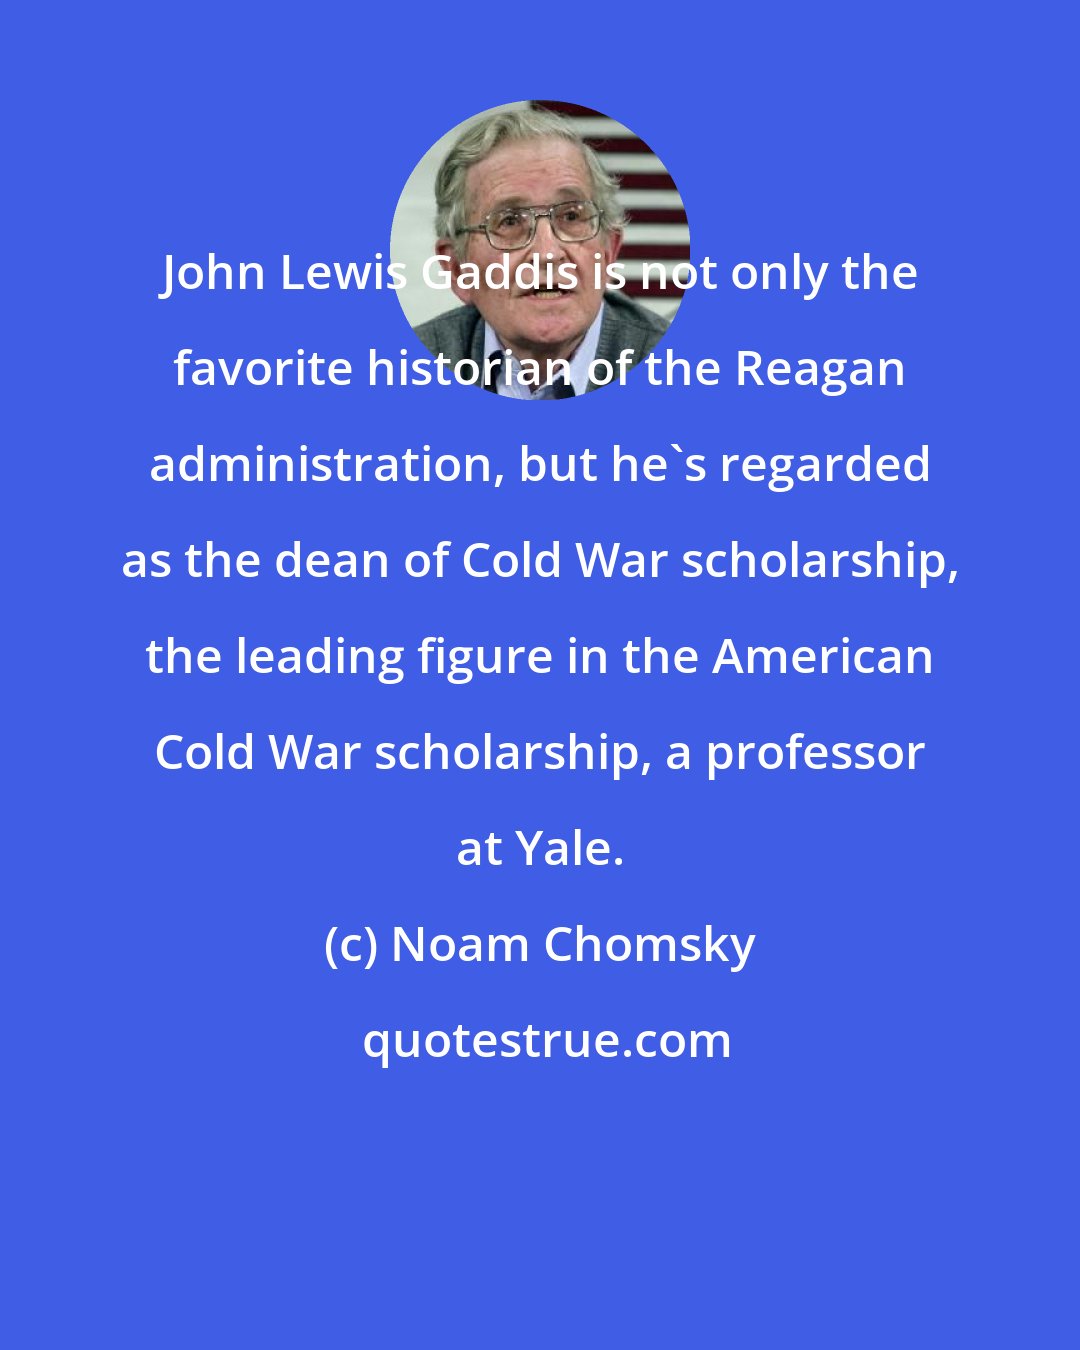 Noam Chomsky: John Lewis Gaddis is not only the favorite historian of the Reagan administration, but he's regarded as the dean of Cold War scholarship, the leading figure in the American Cold War scholarship, a professor at Yale.